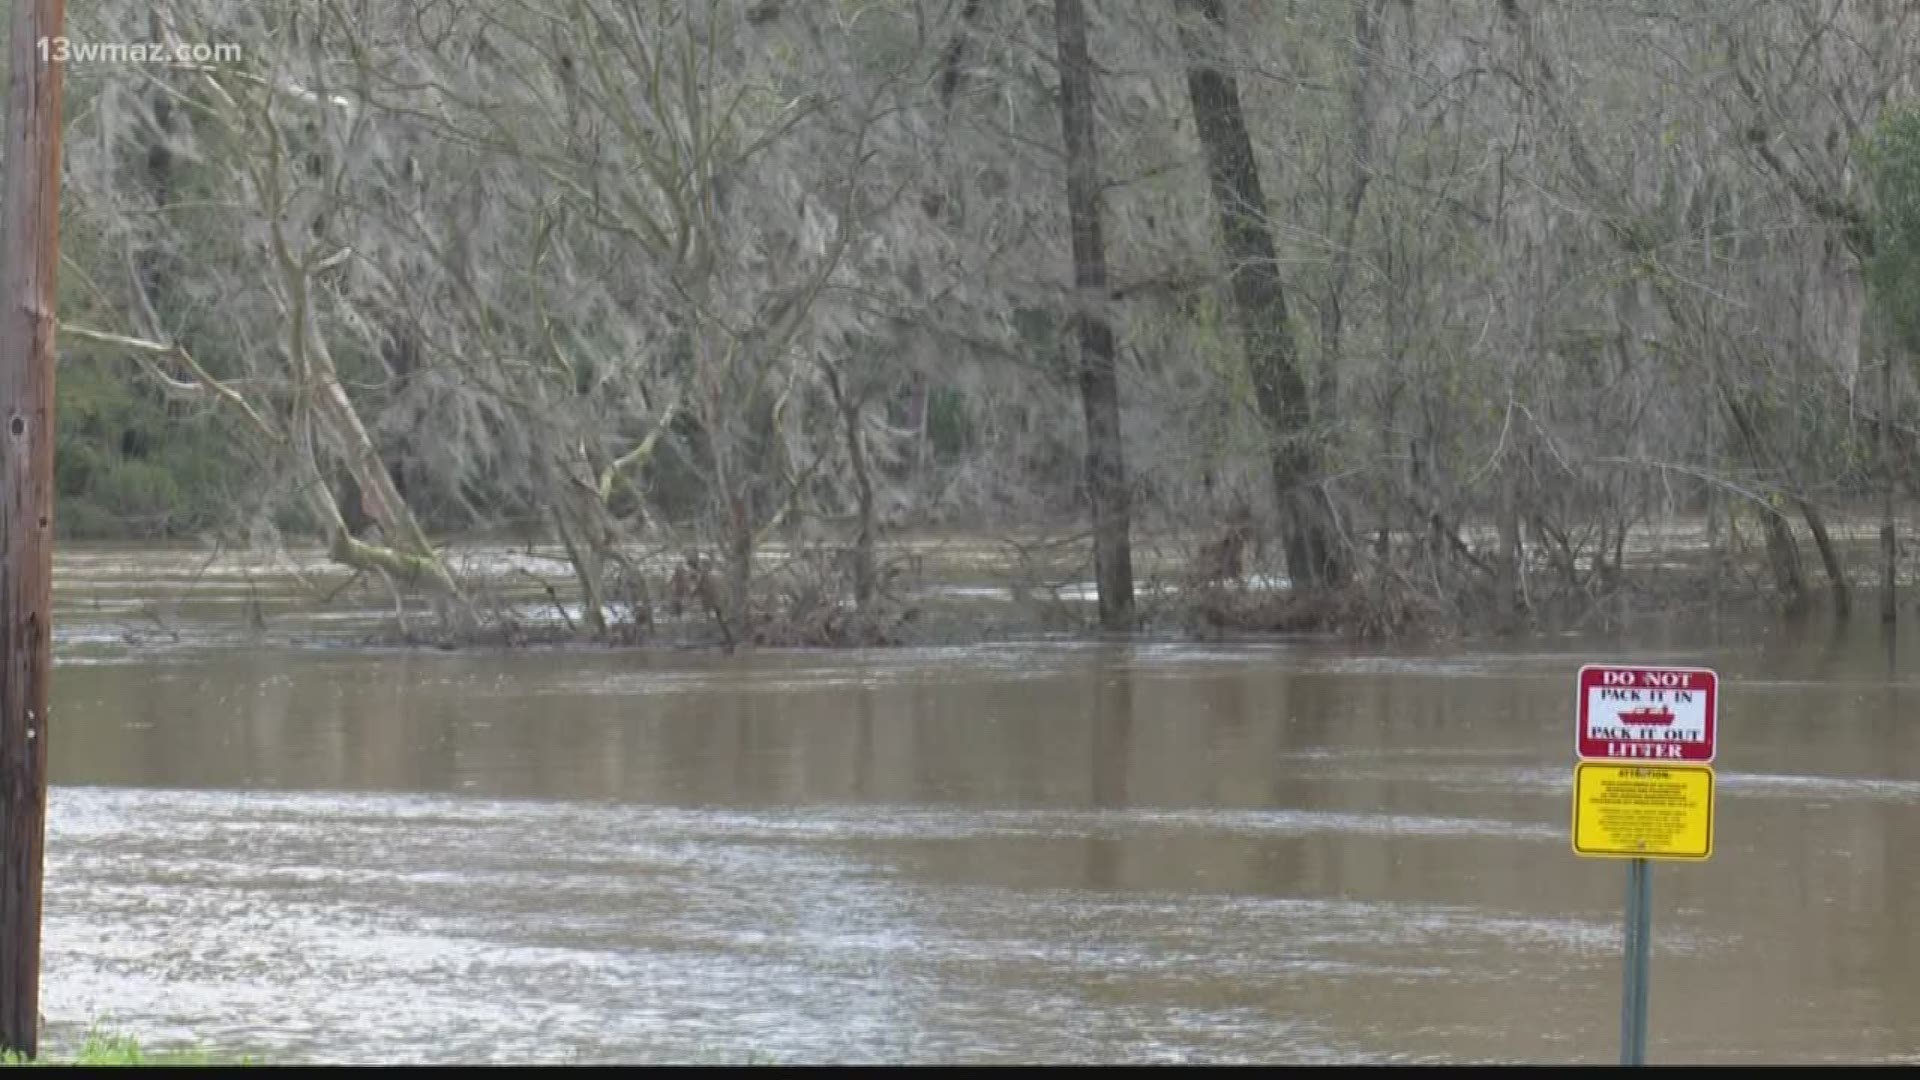 In Pulaski County, the Ocmulgee River is rising and is expected to get even higher this weekend. Some people have already left their homes for safety.